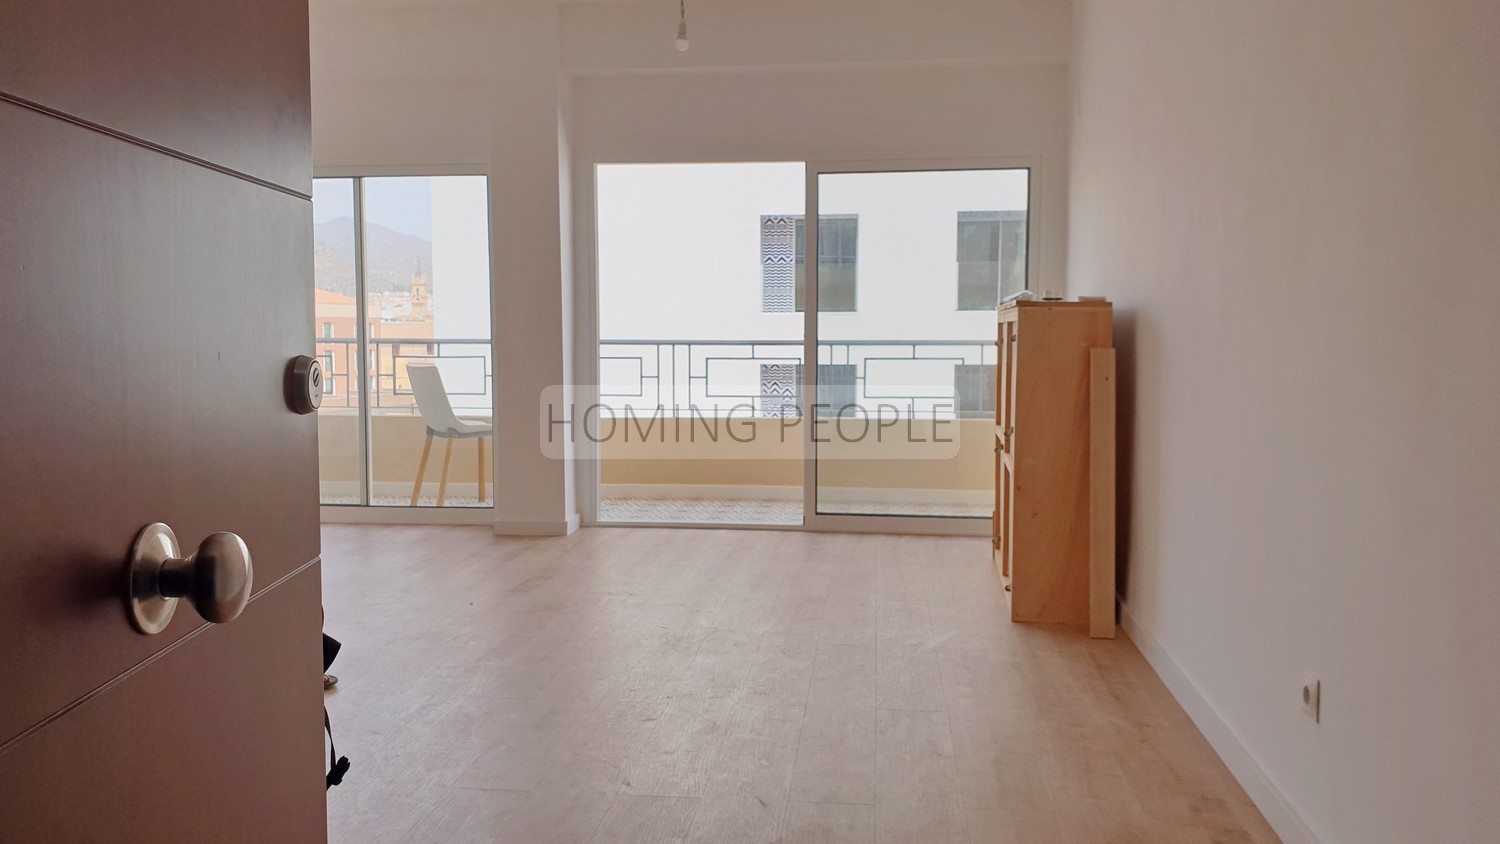 Freshly-refurbished, unfurnished flat with a terrace, located close to the main market!